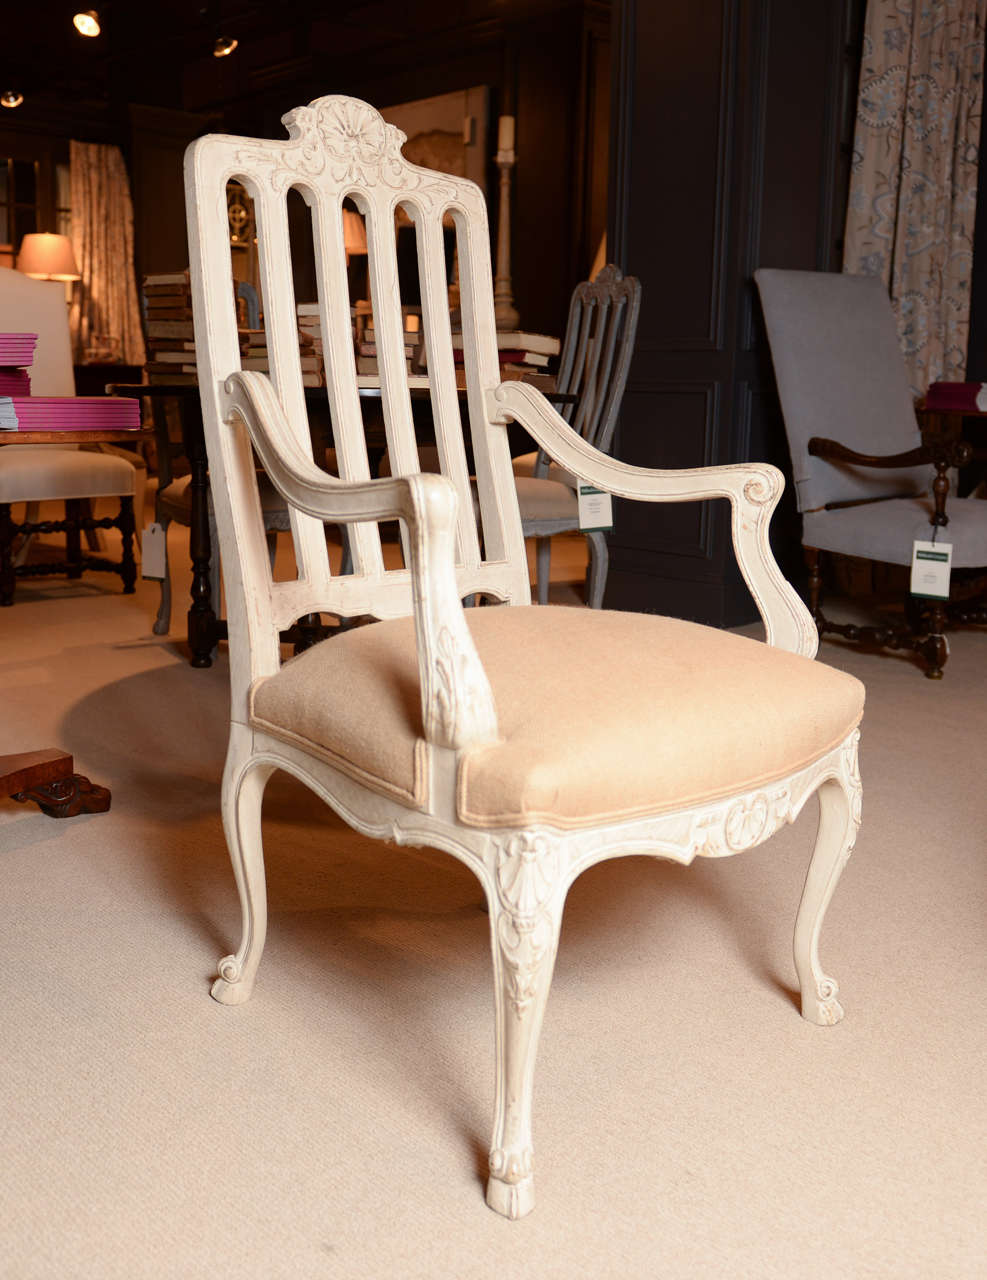 White Painted Arm Chair
Upholstered in Linen